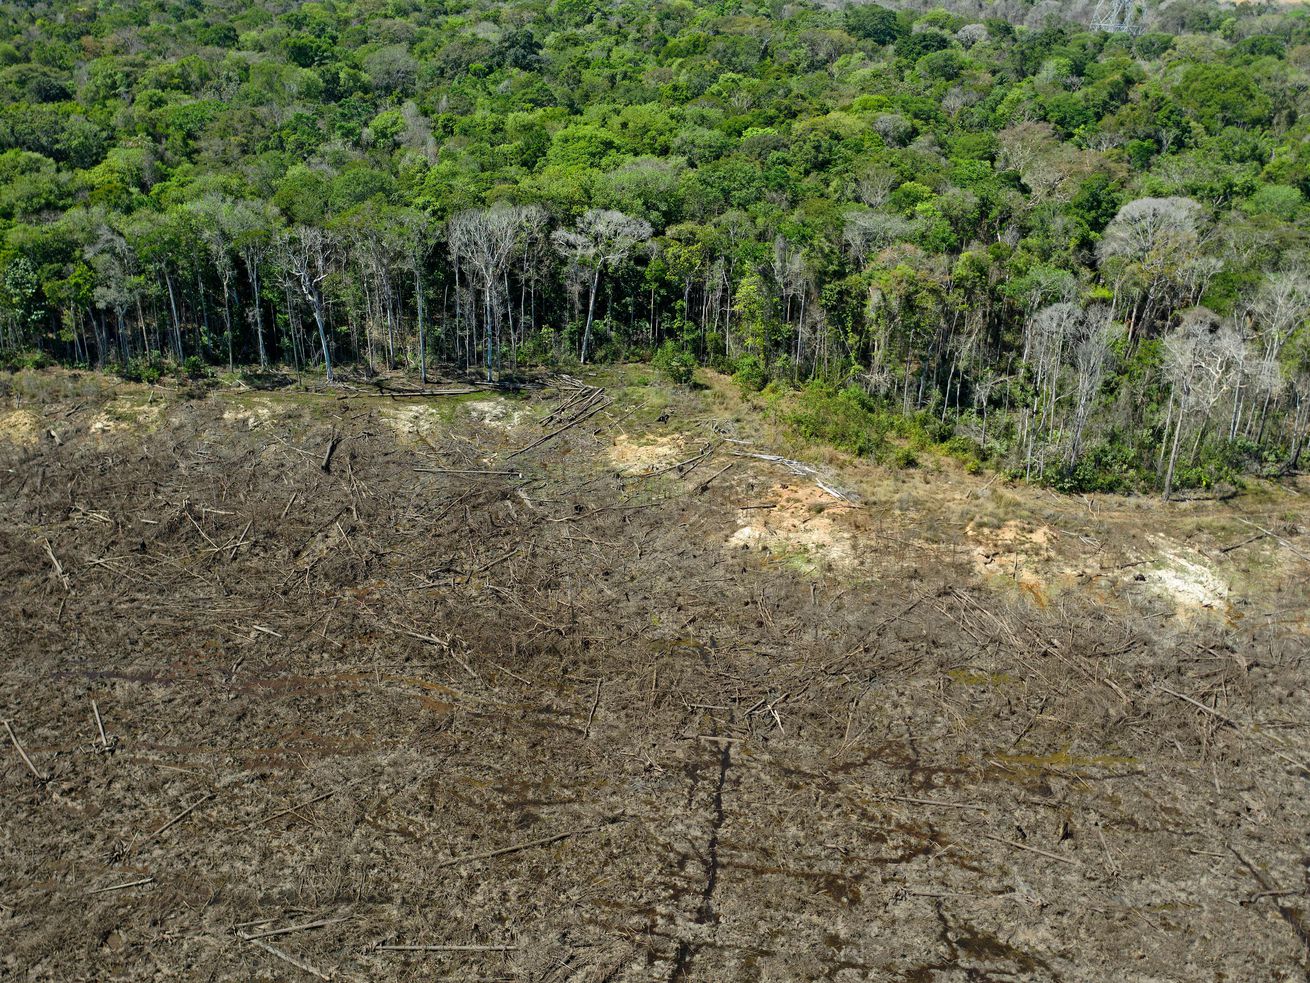 Deforestation in Brazil is out of control. Bolsonaro is asking for billions to stop it.